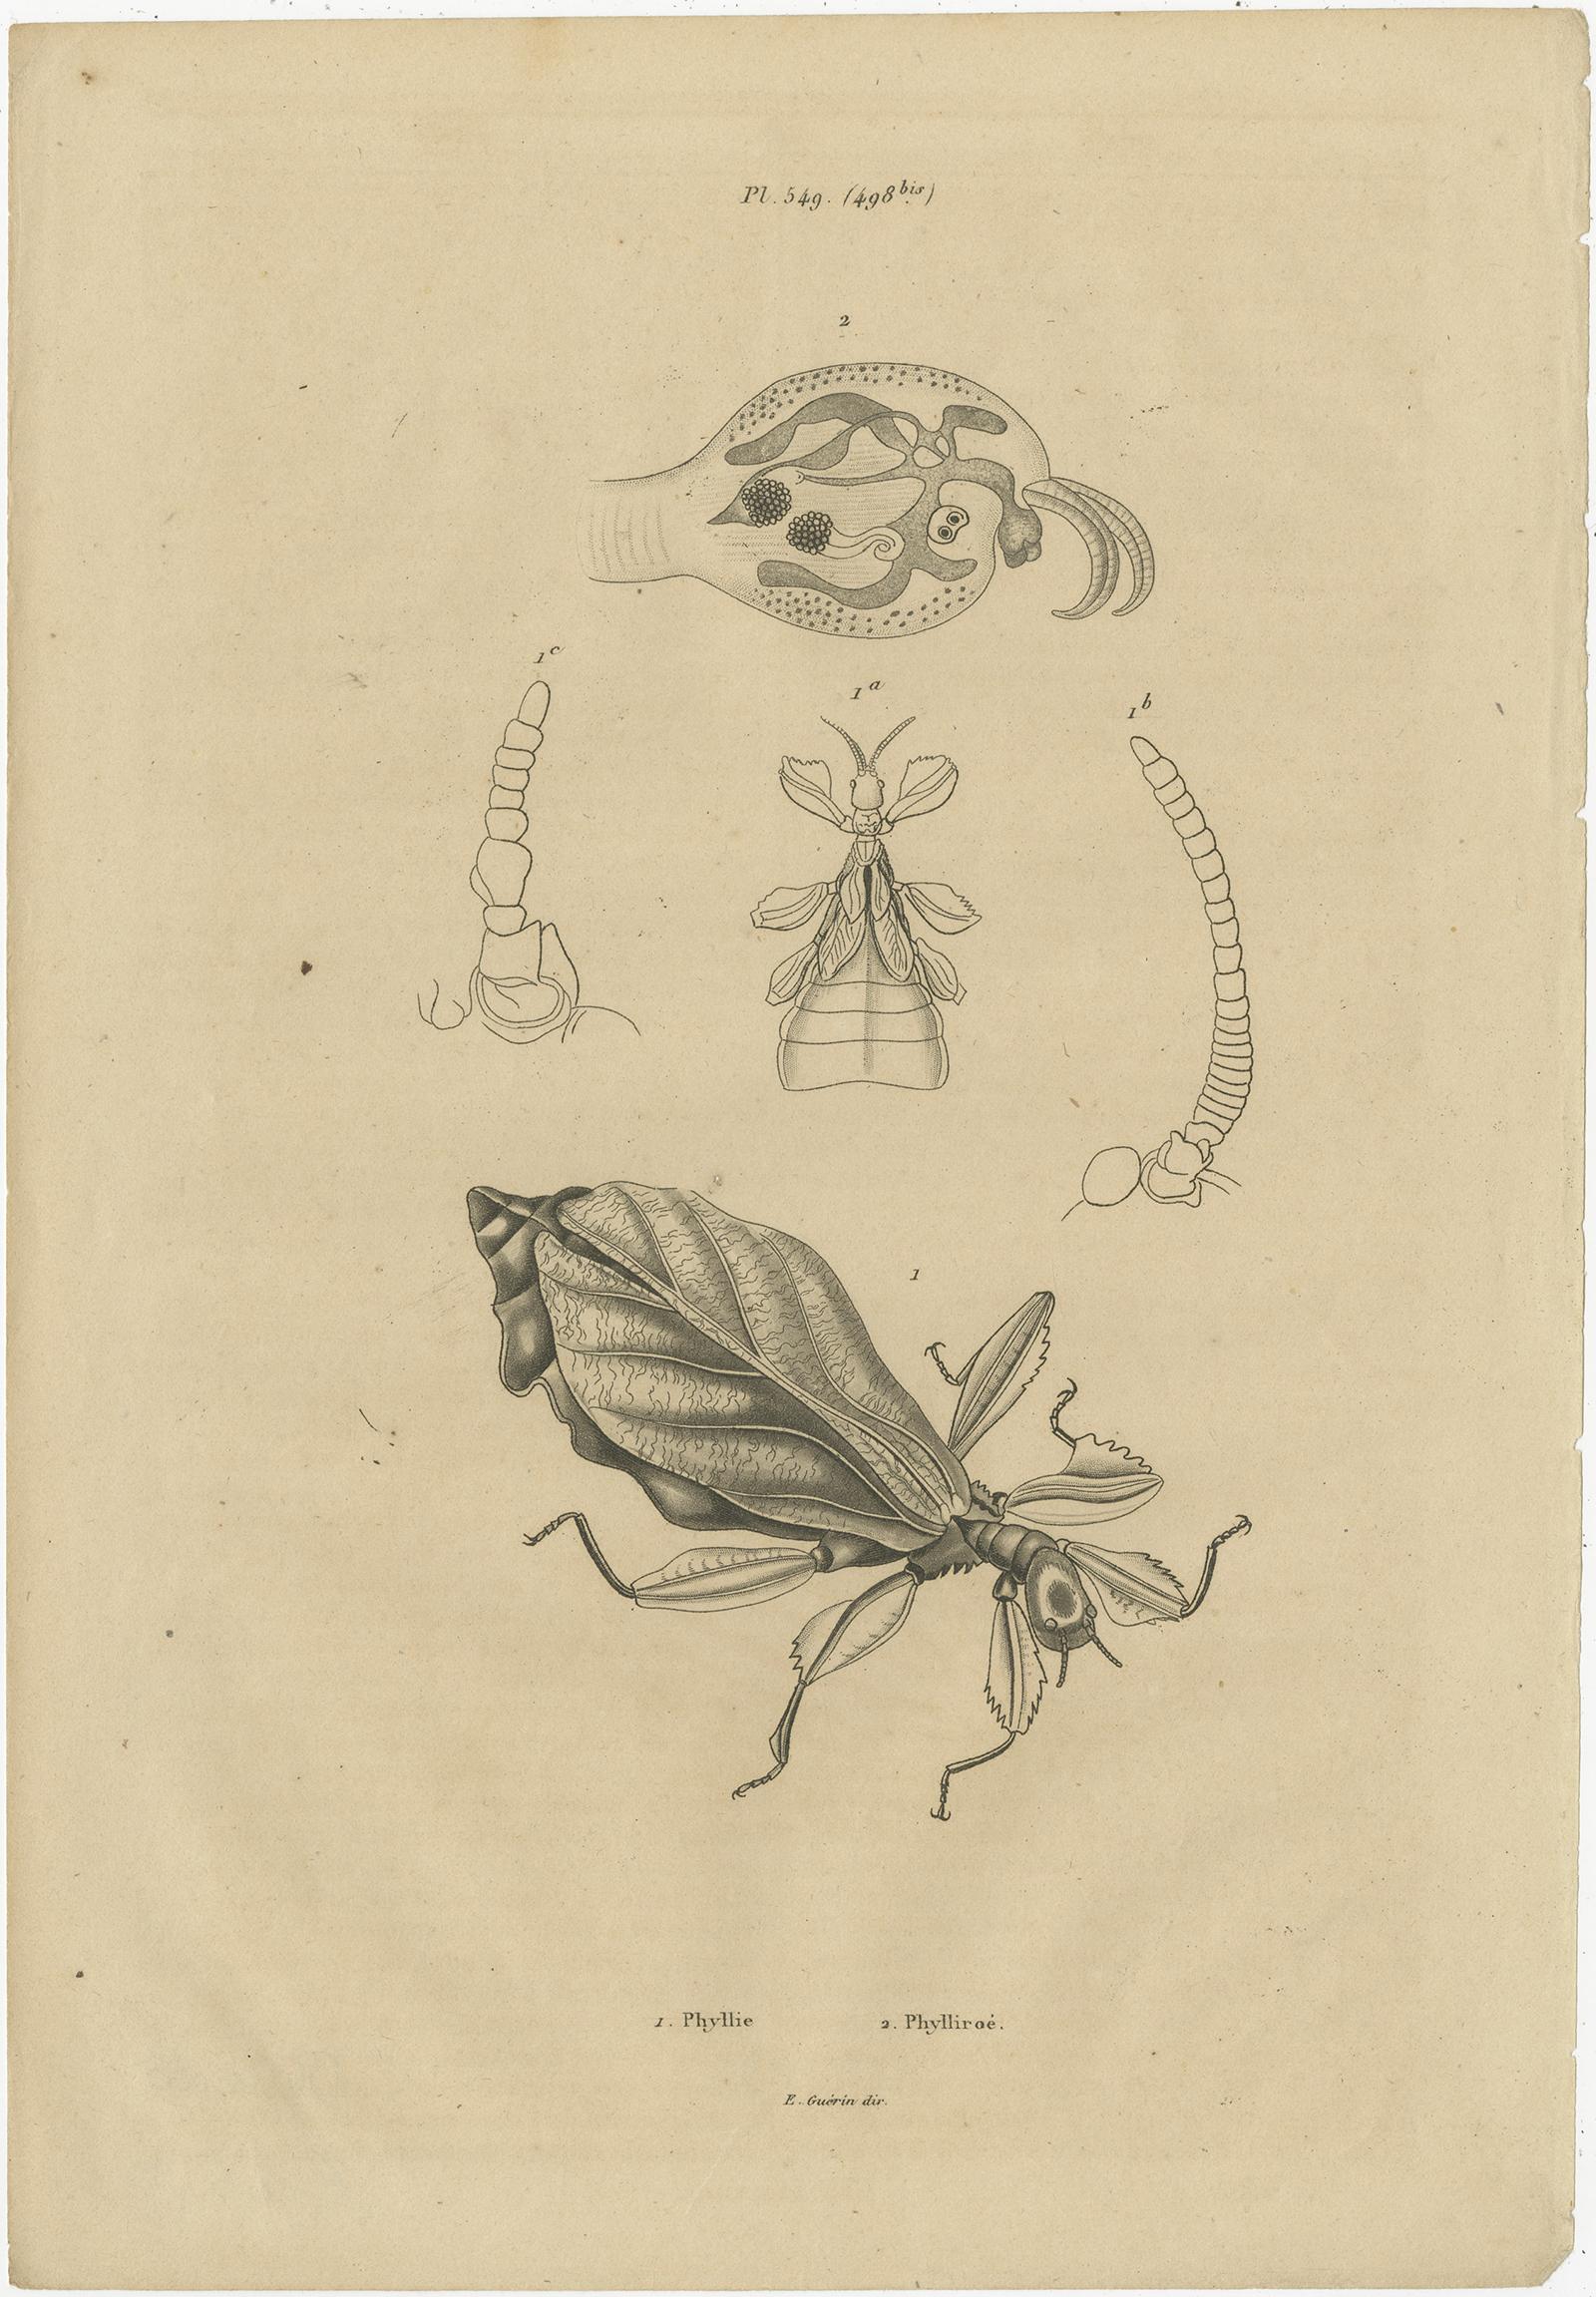 Set of three antique prints of various insects and butterflies. These prints originate from 'Dictionnaire Pittoresque d'Histoire Naturelle' by Felix-Edouard Guerin-Meneville. Published 1834-39.